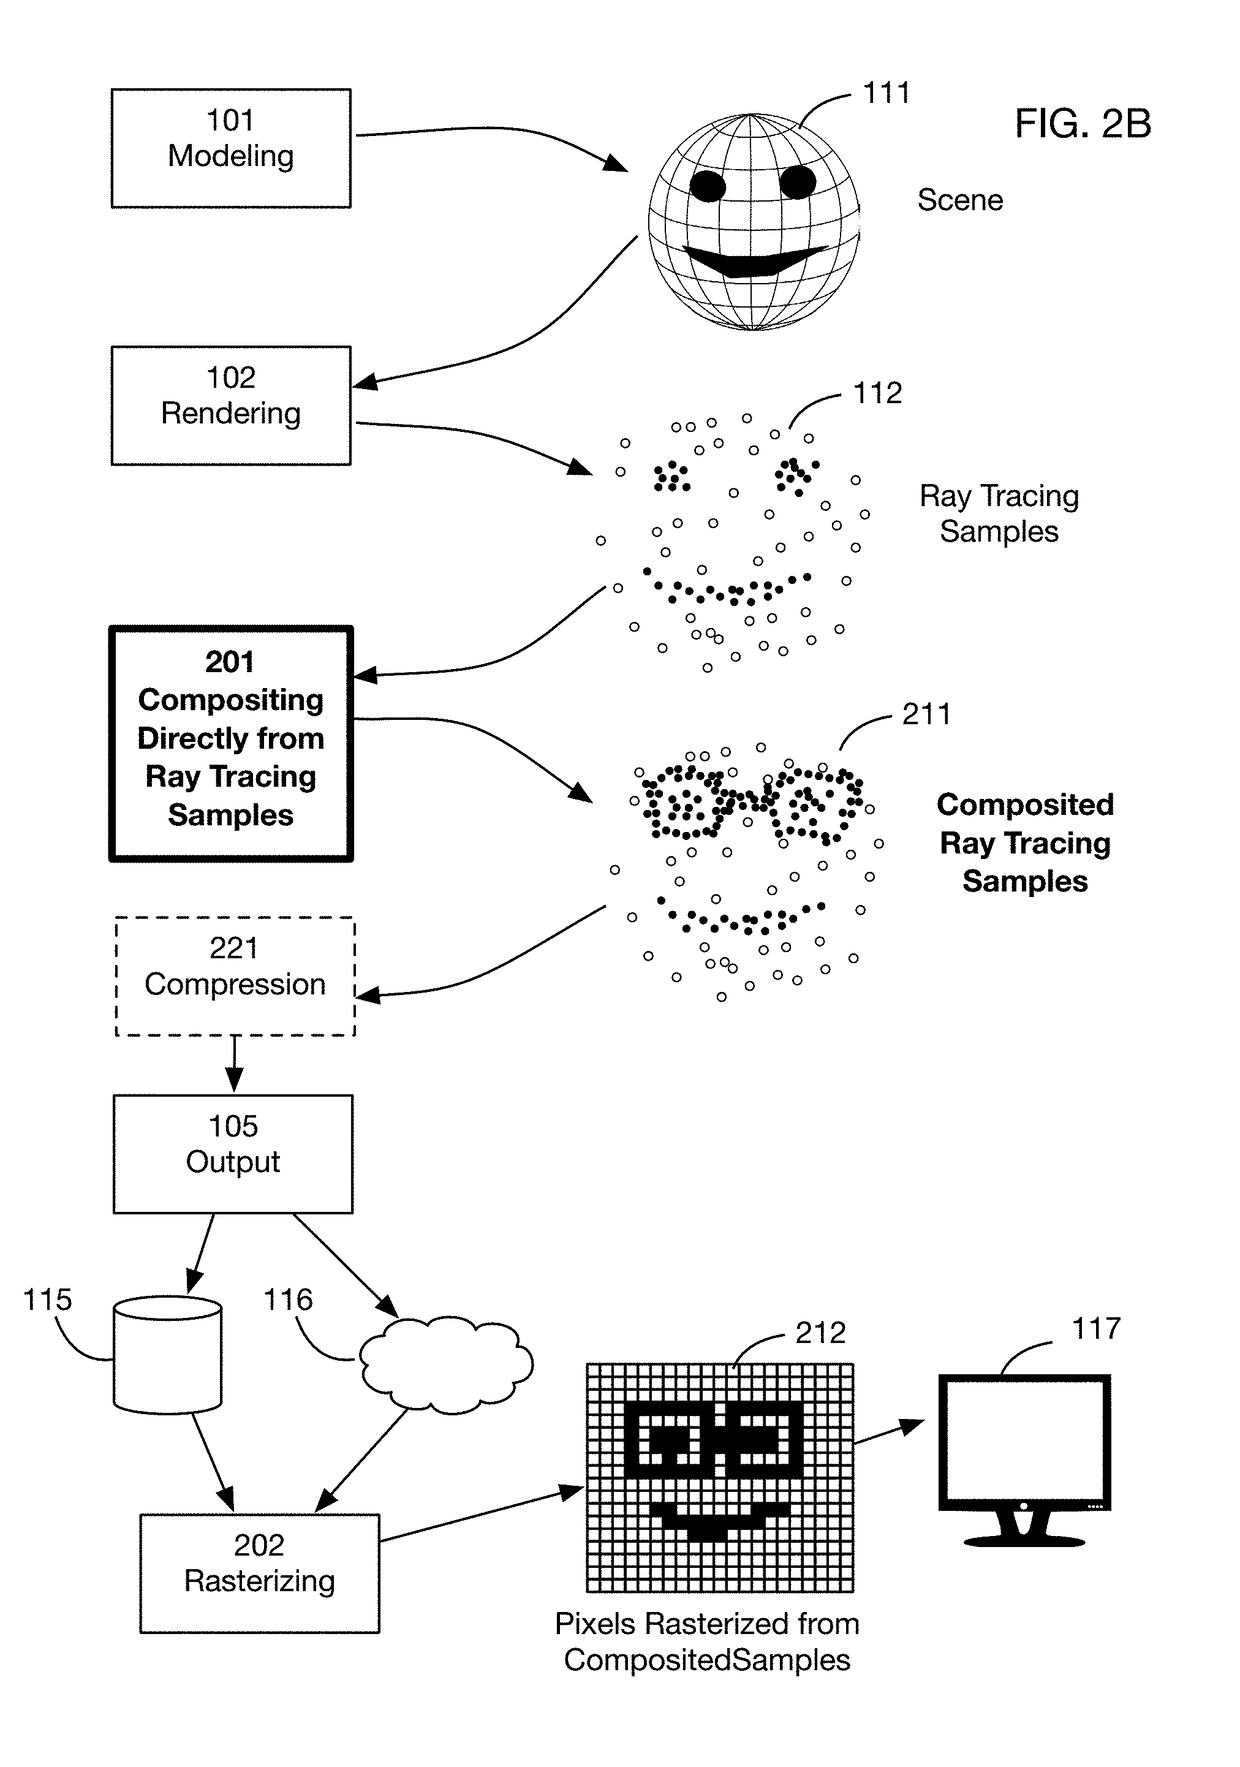 Secure rendering system that generates ray tracing samples with obfuscated position data